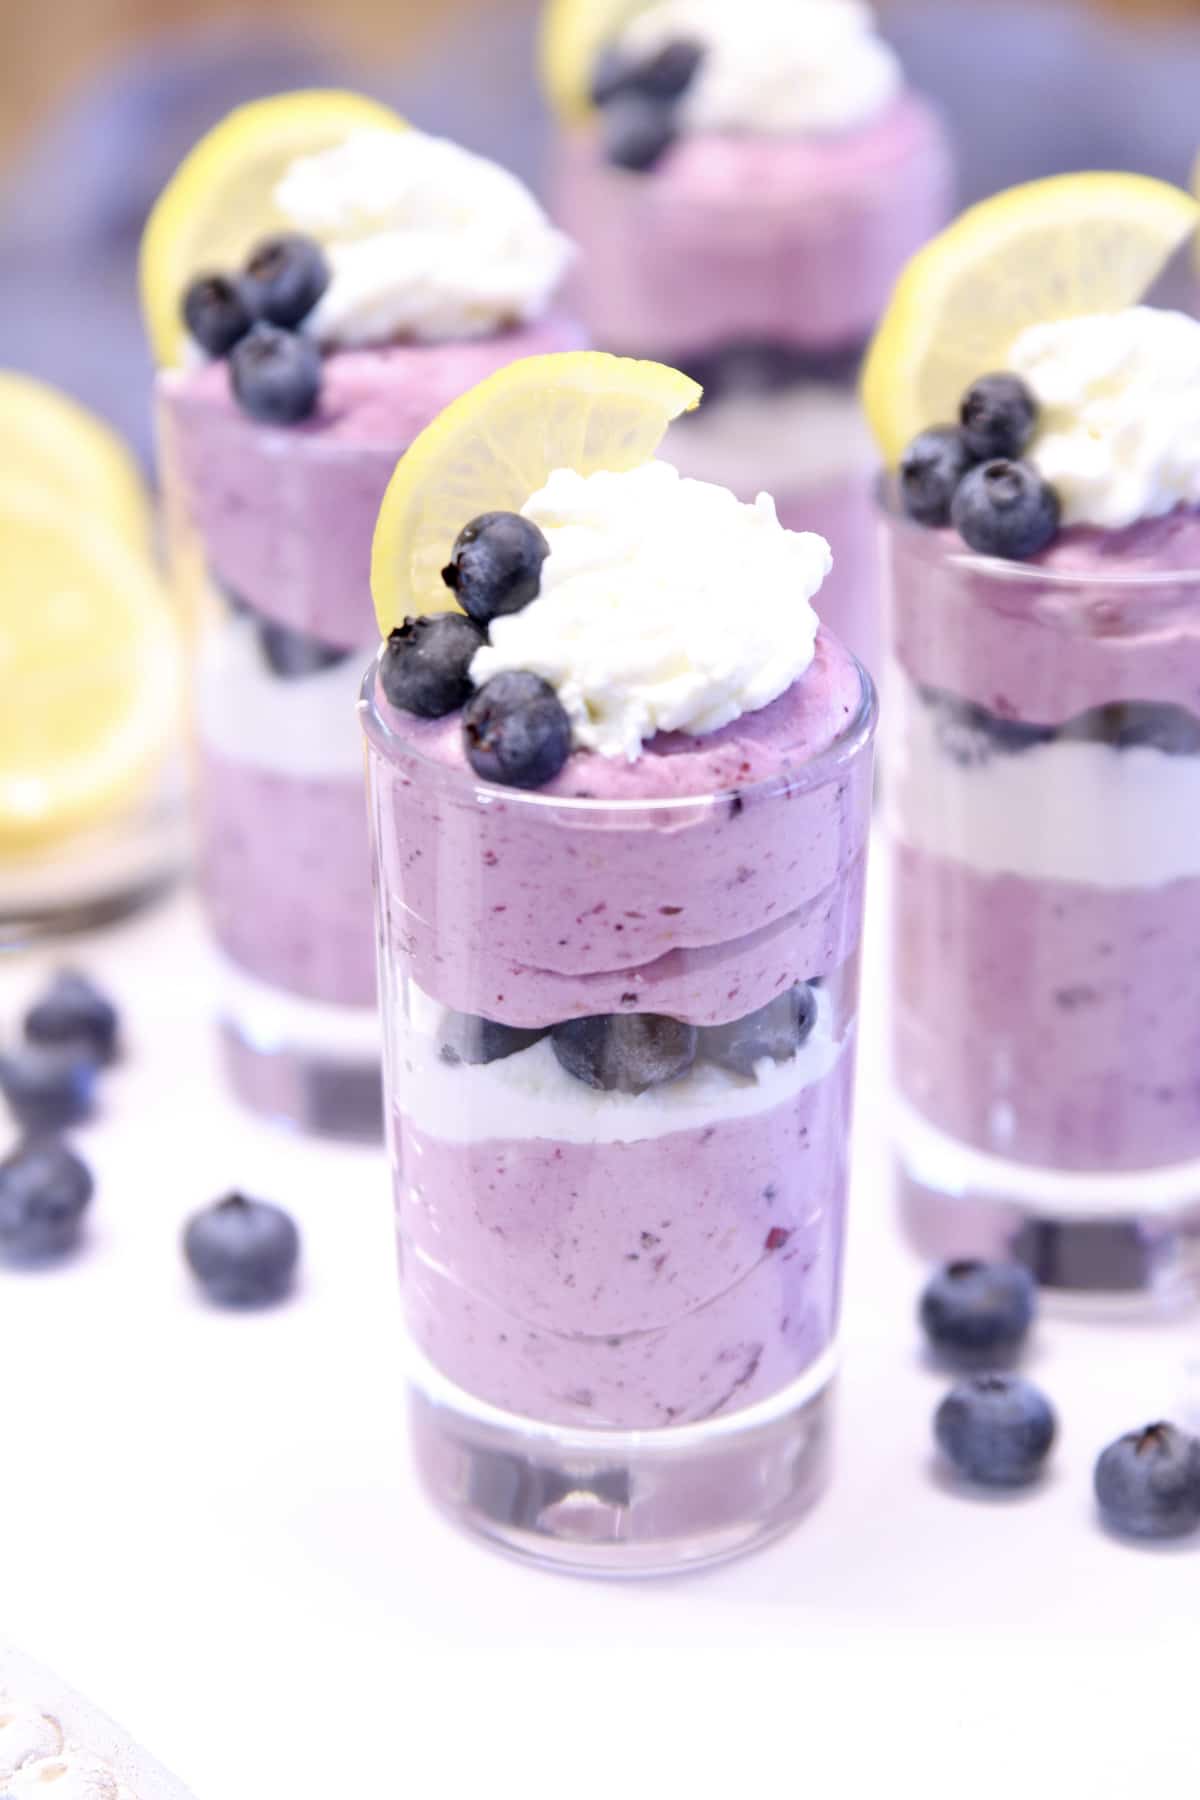 4 dessert glasses with layered blueberry cheesecake.